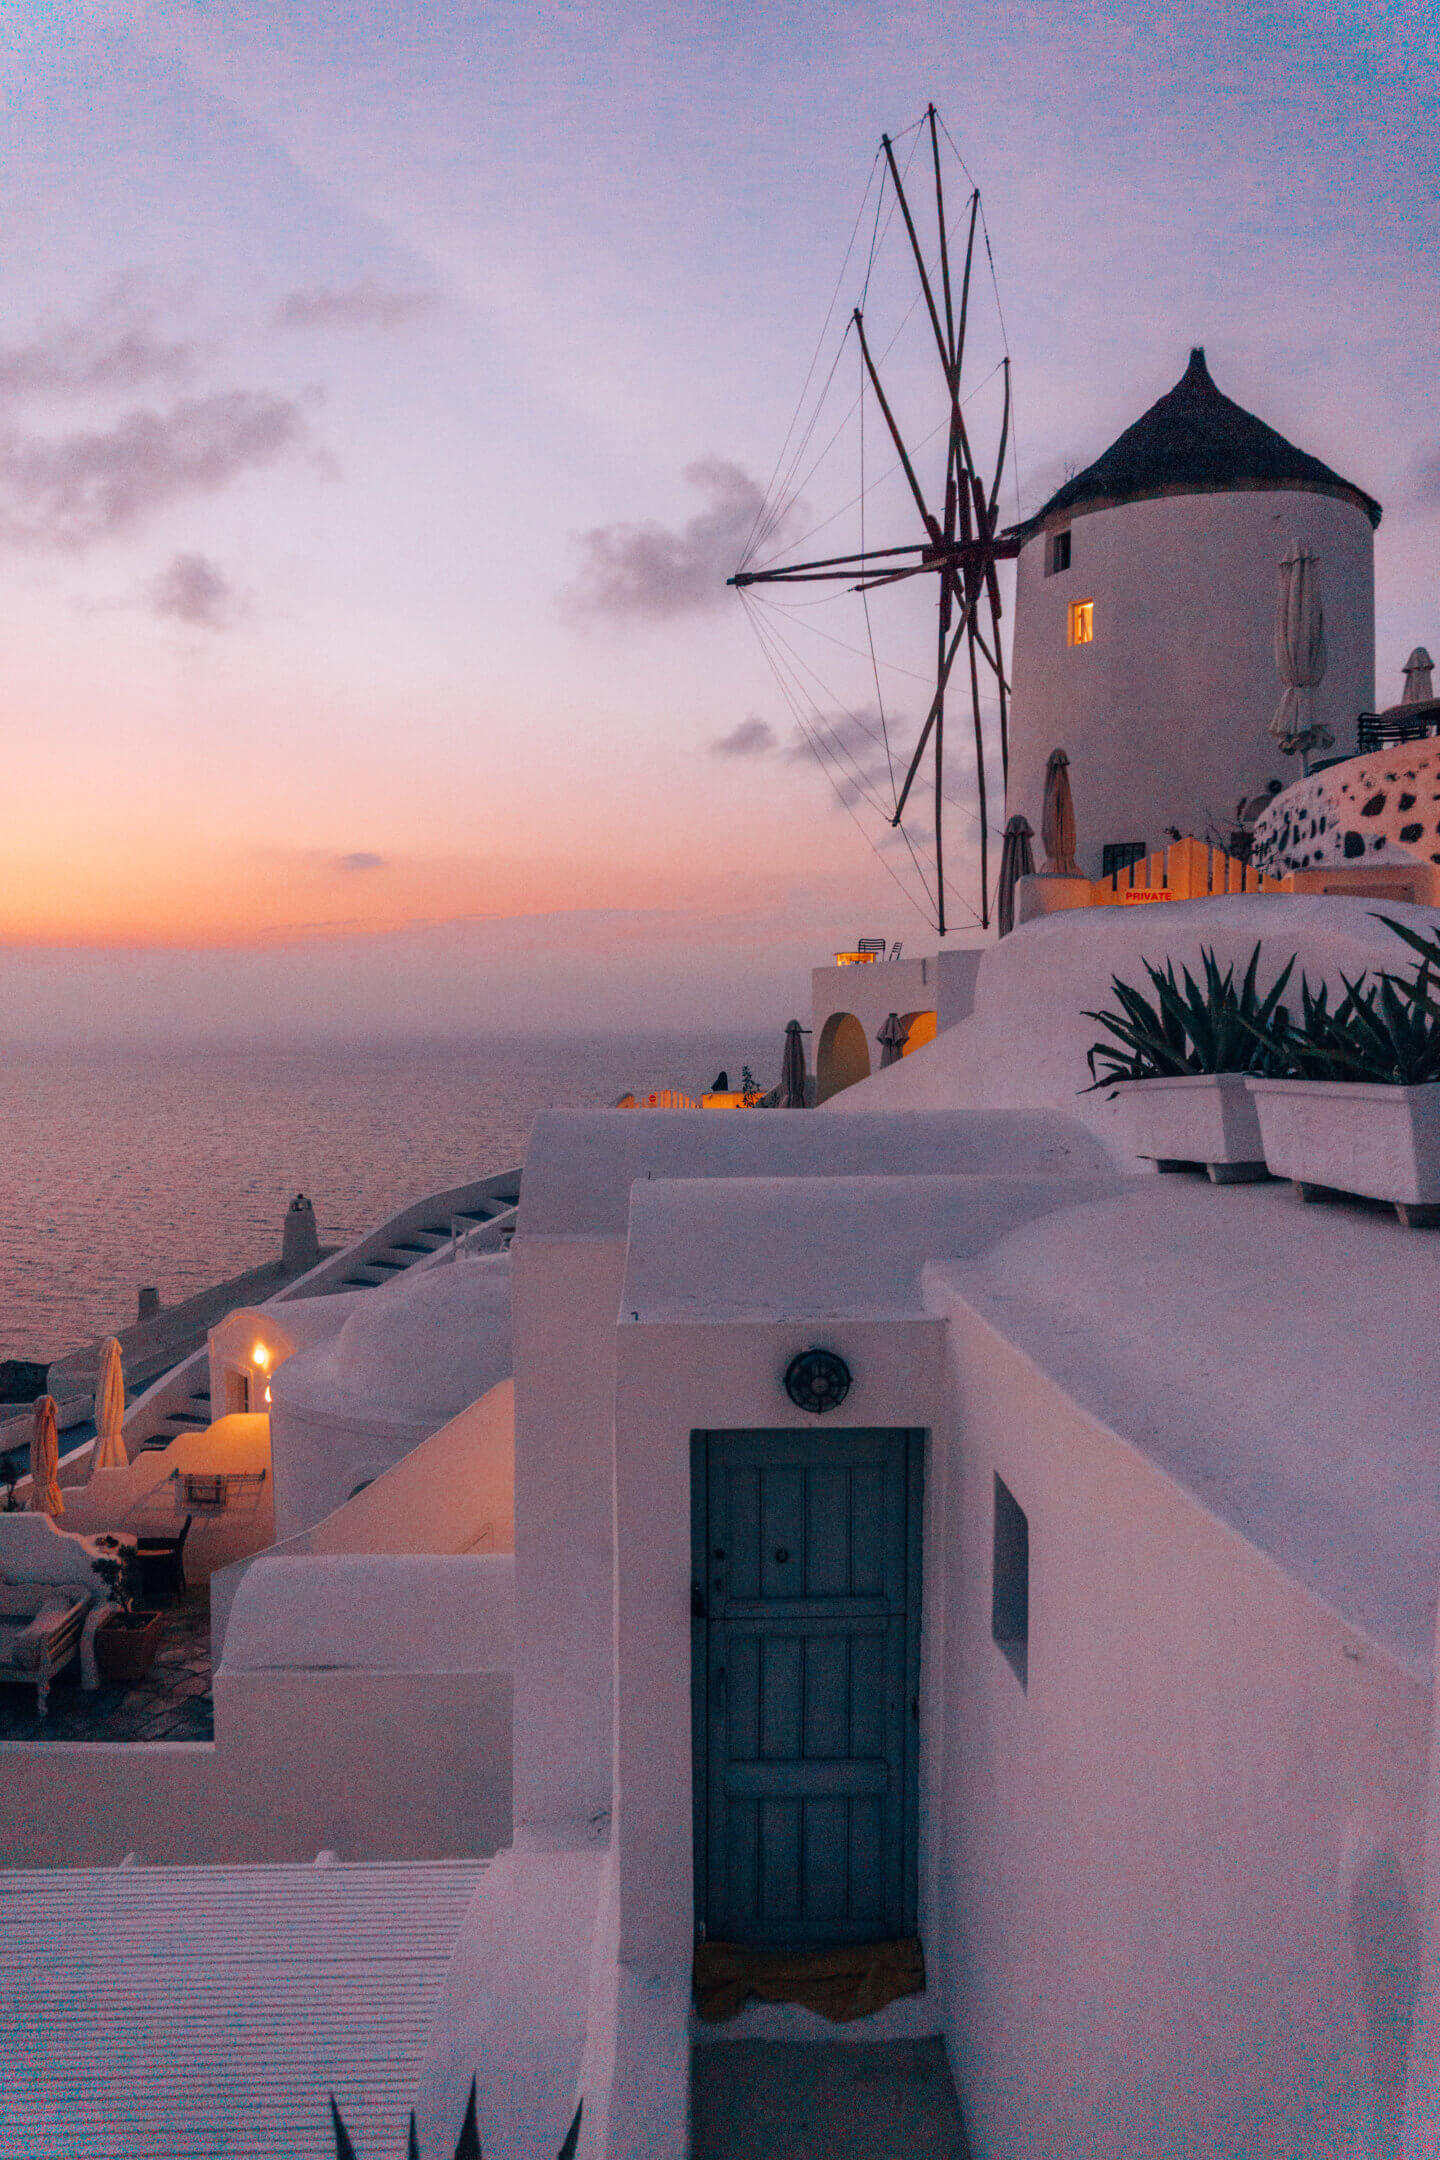 A historic windmill on Santorini during a beautiful sunset in Greece.